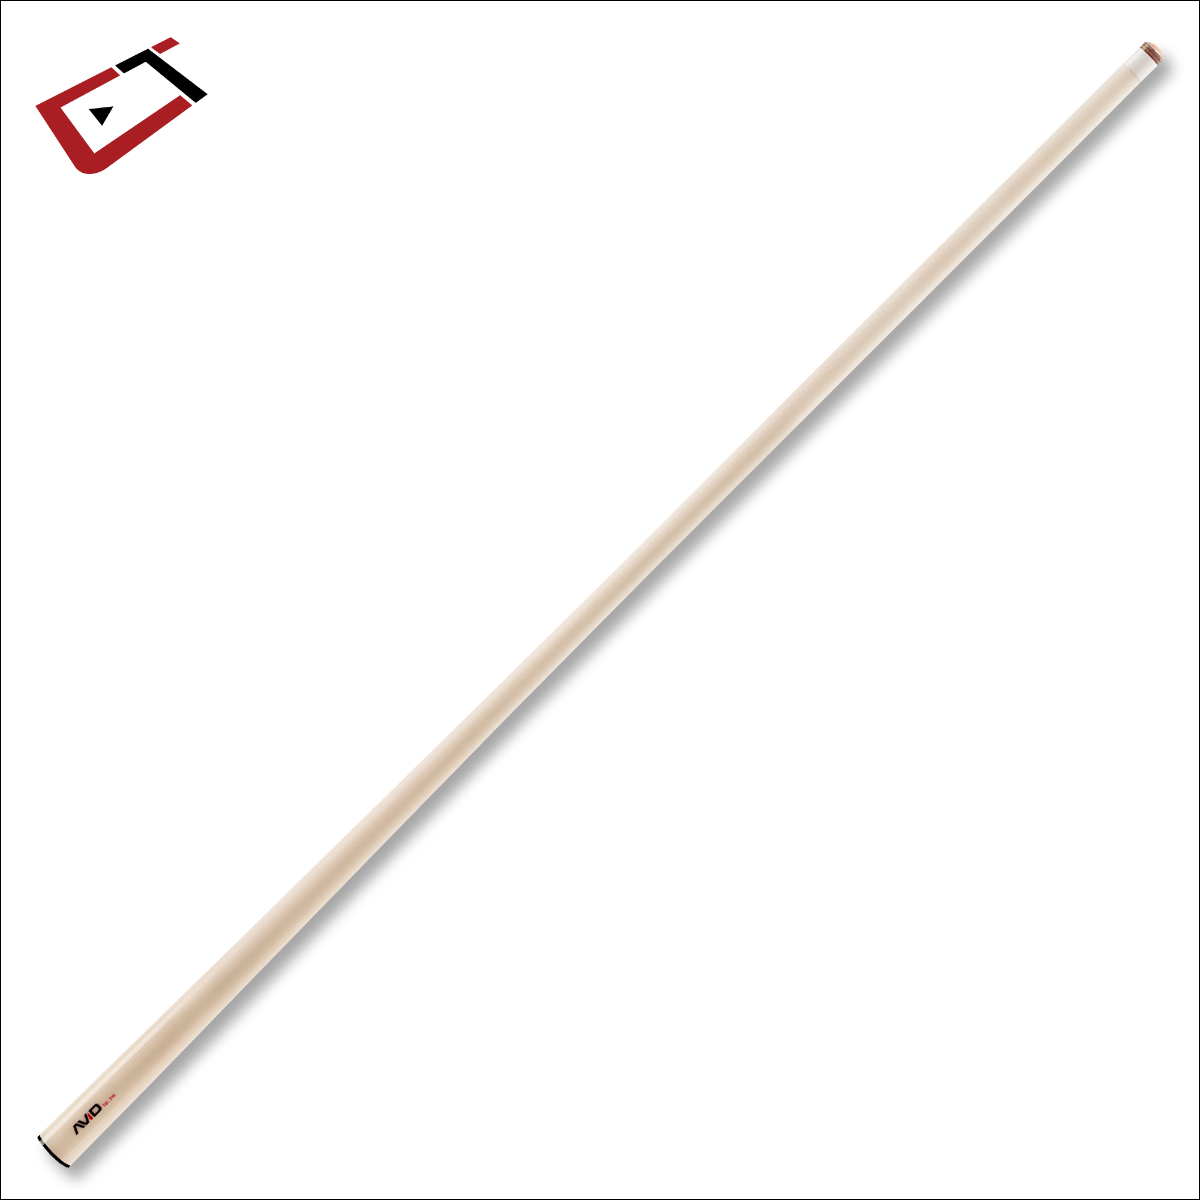 Imperial Pool Cue Imperial - AVID ERA Natural 6 PT Cue NW 12.75MM - 95-323NW